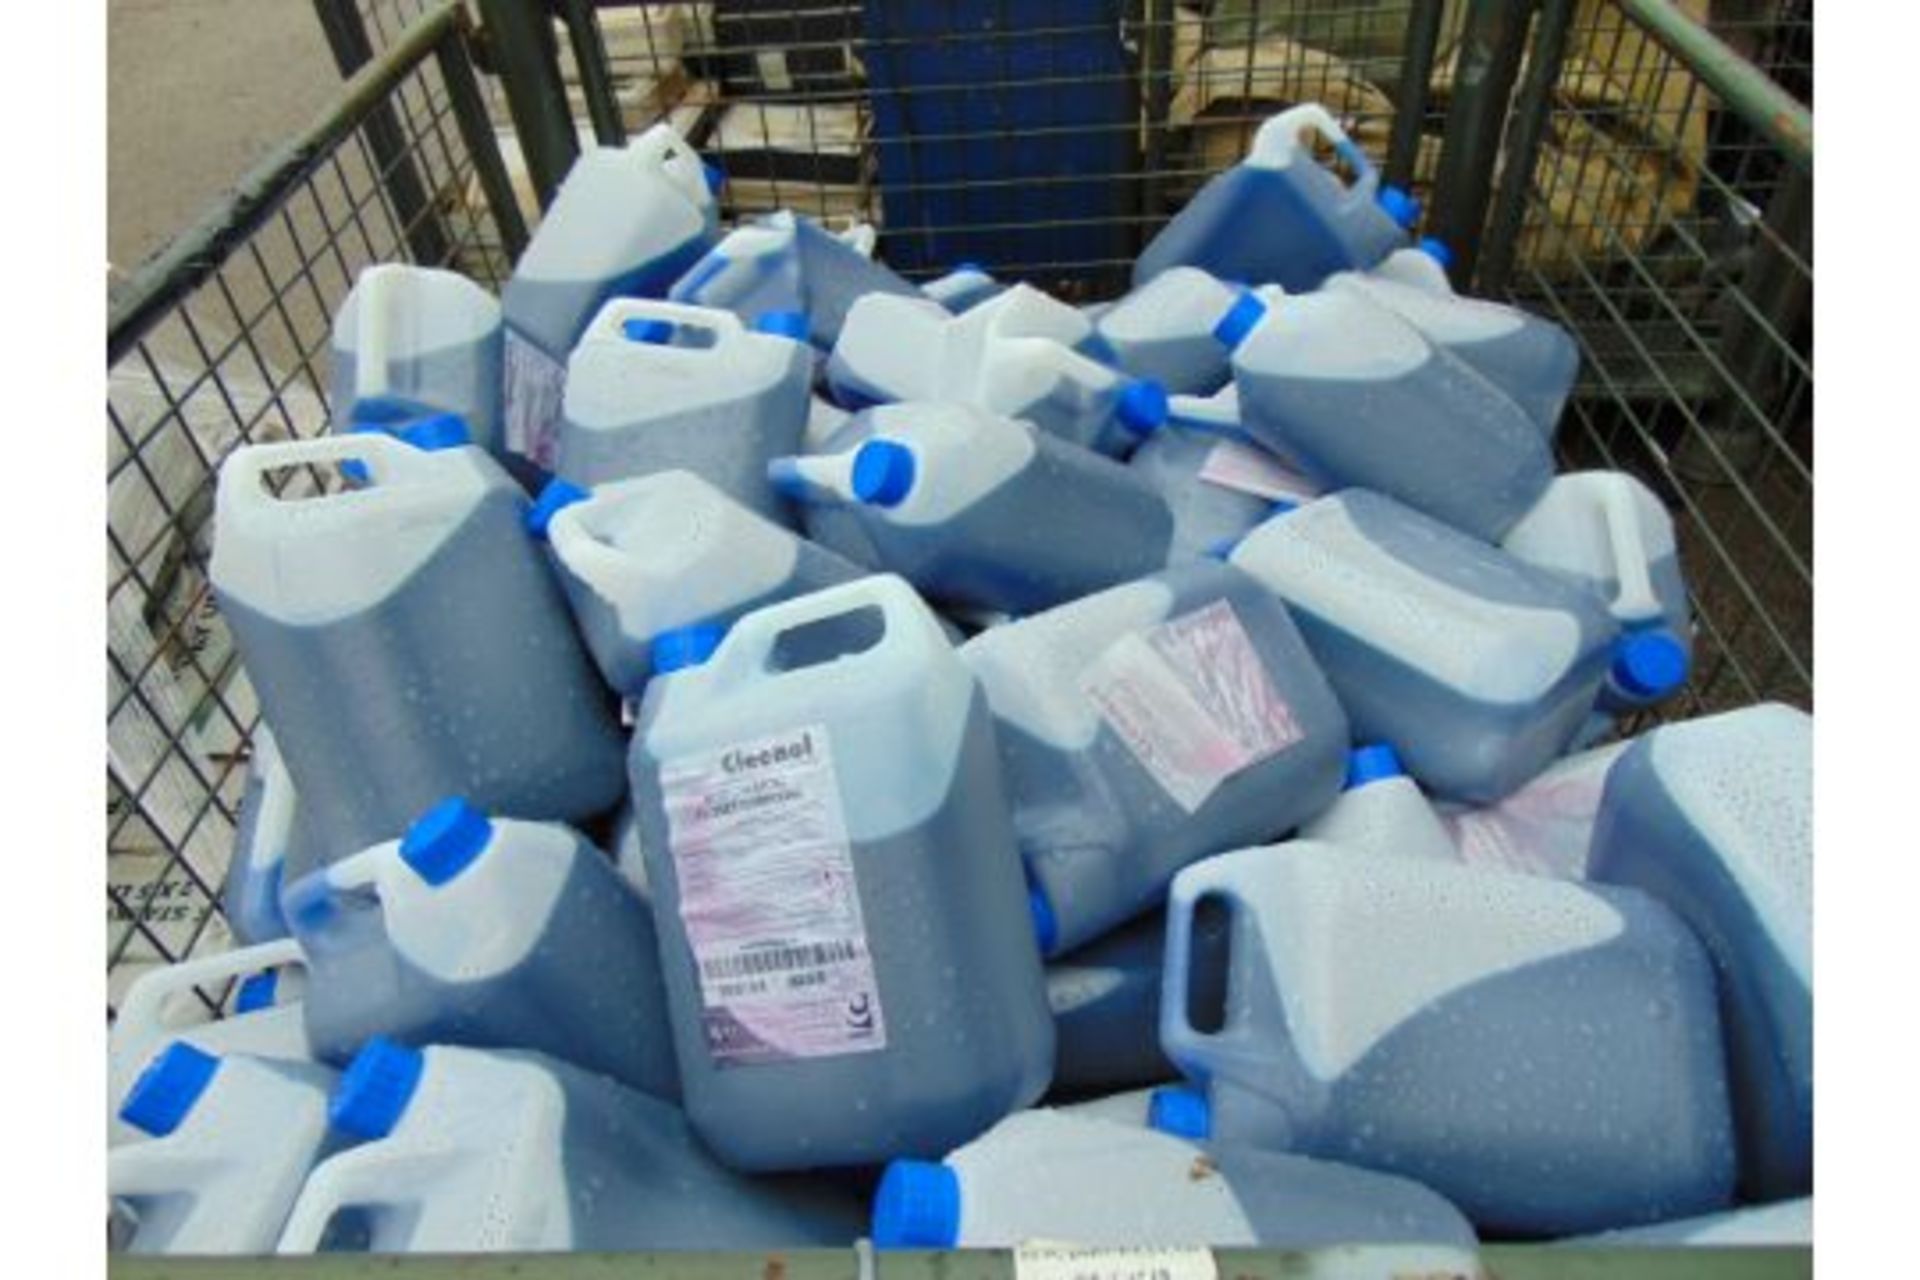 Approx 120 5 litre Drums of Cleenel Toilet Additive Ideal for Caravans, Campers, Portable Toilet etc - Image 3 of 3